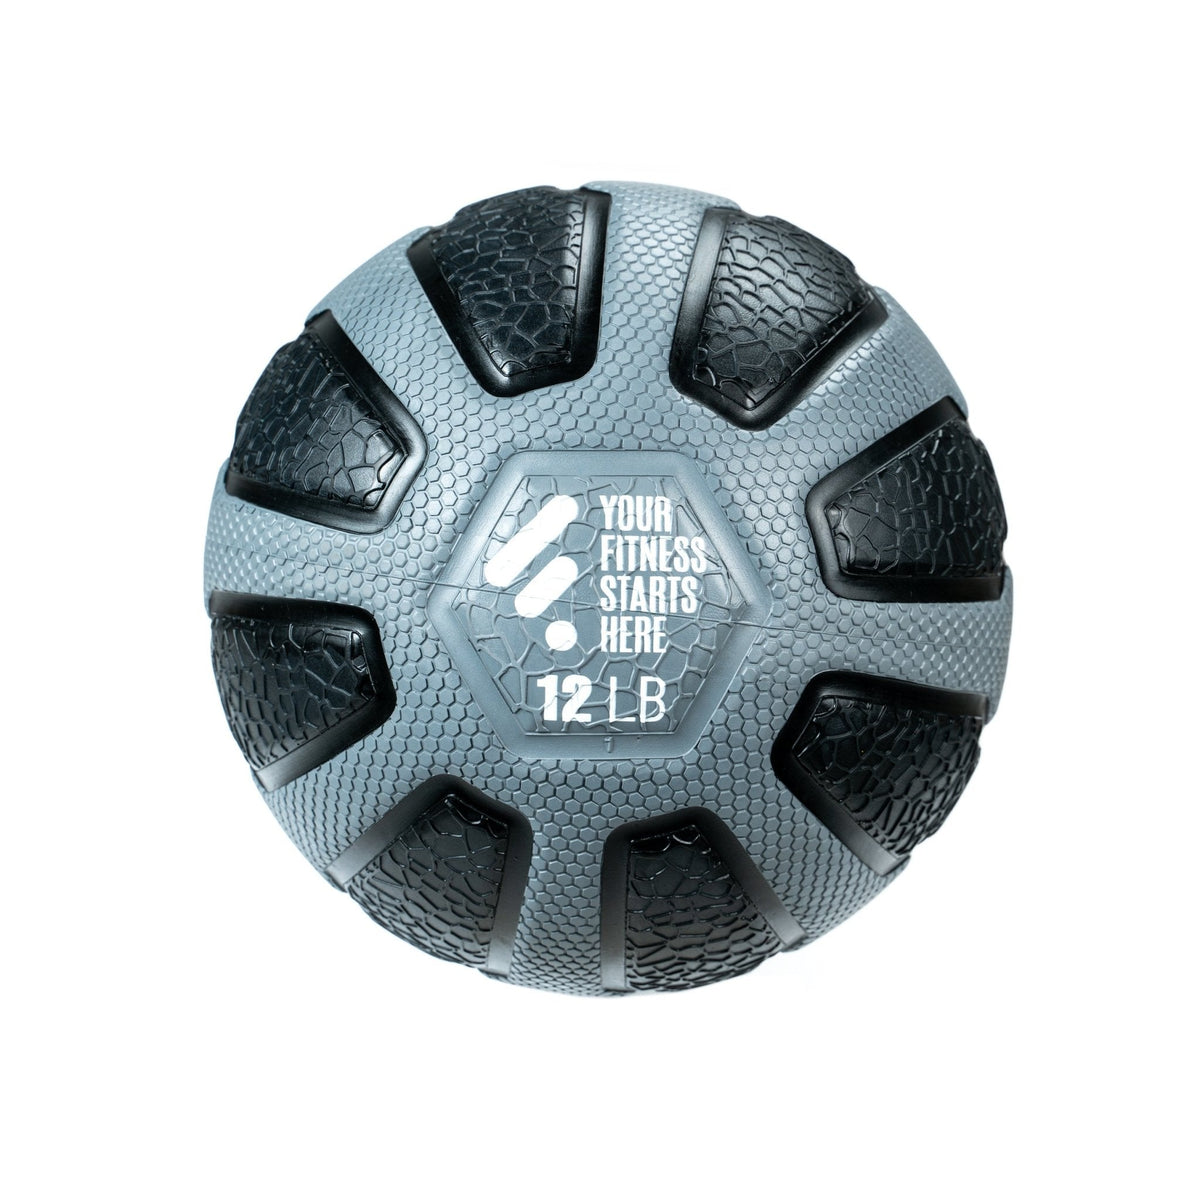 FitWay Equip. Max Grip Medicine Ball - 12 Lbs - Fitness Experience